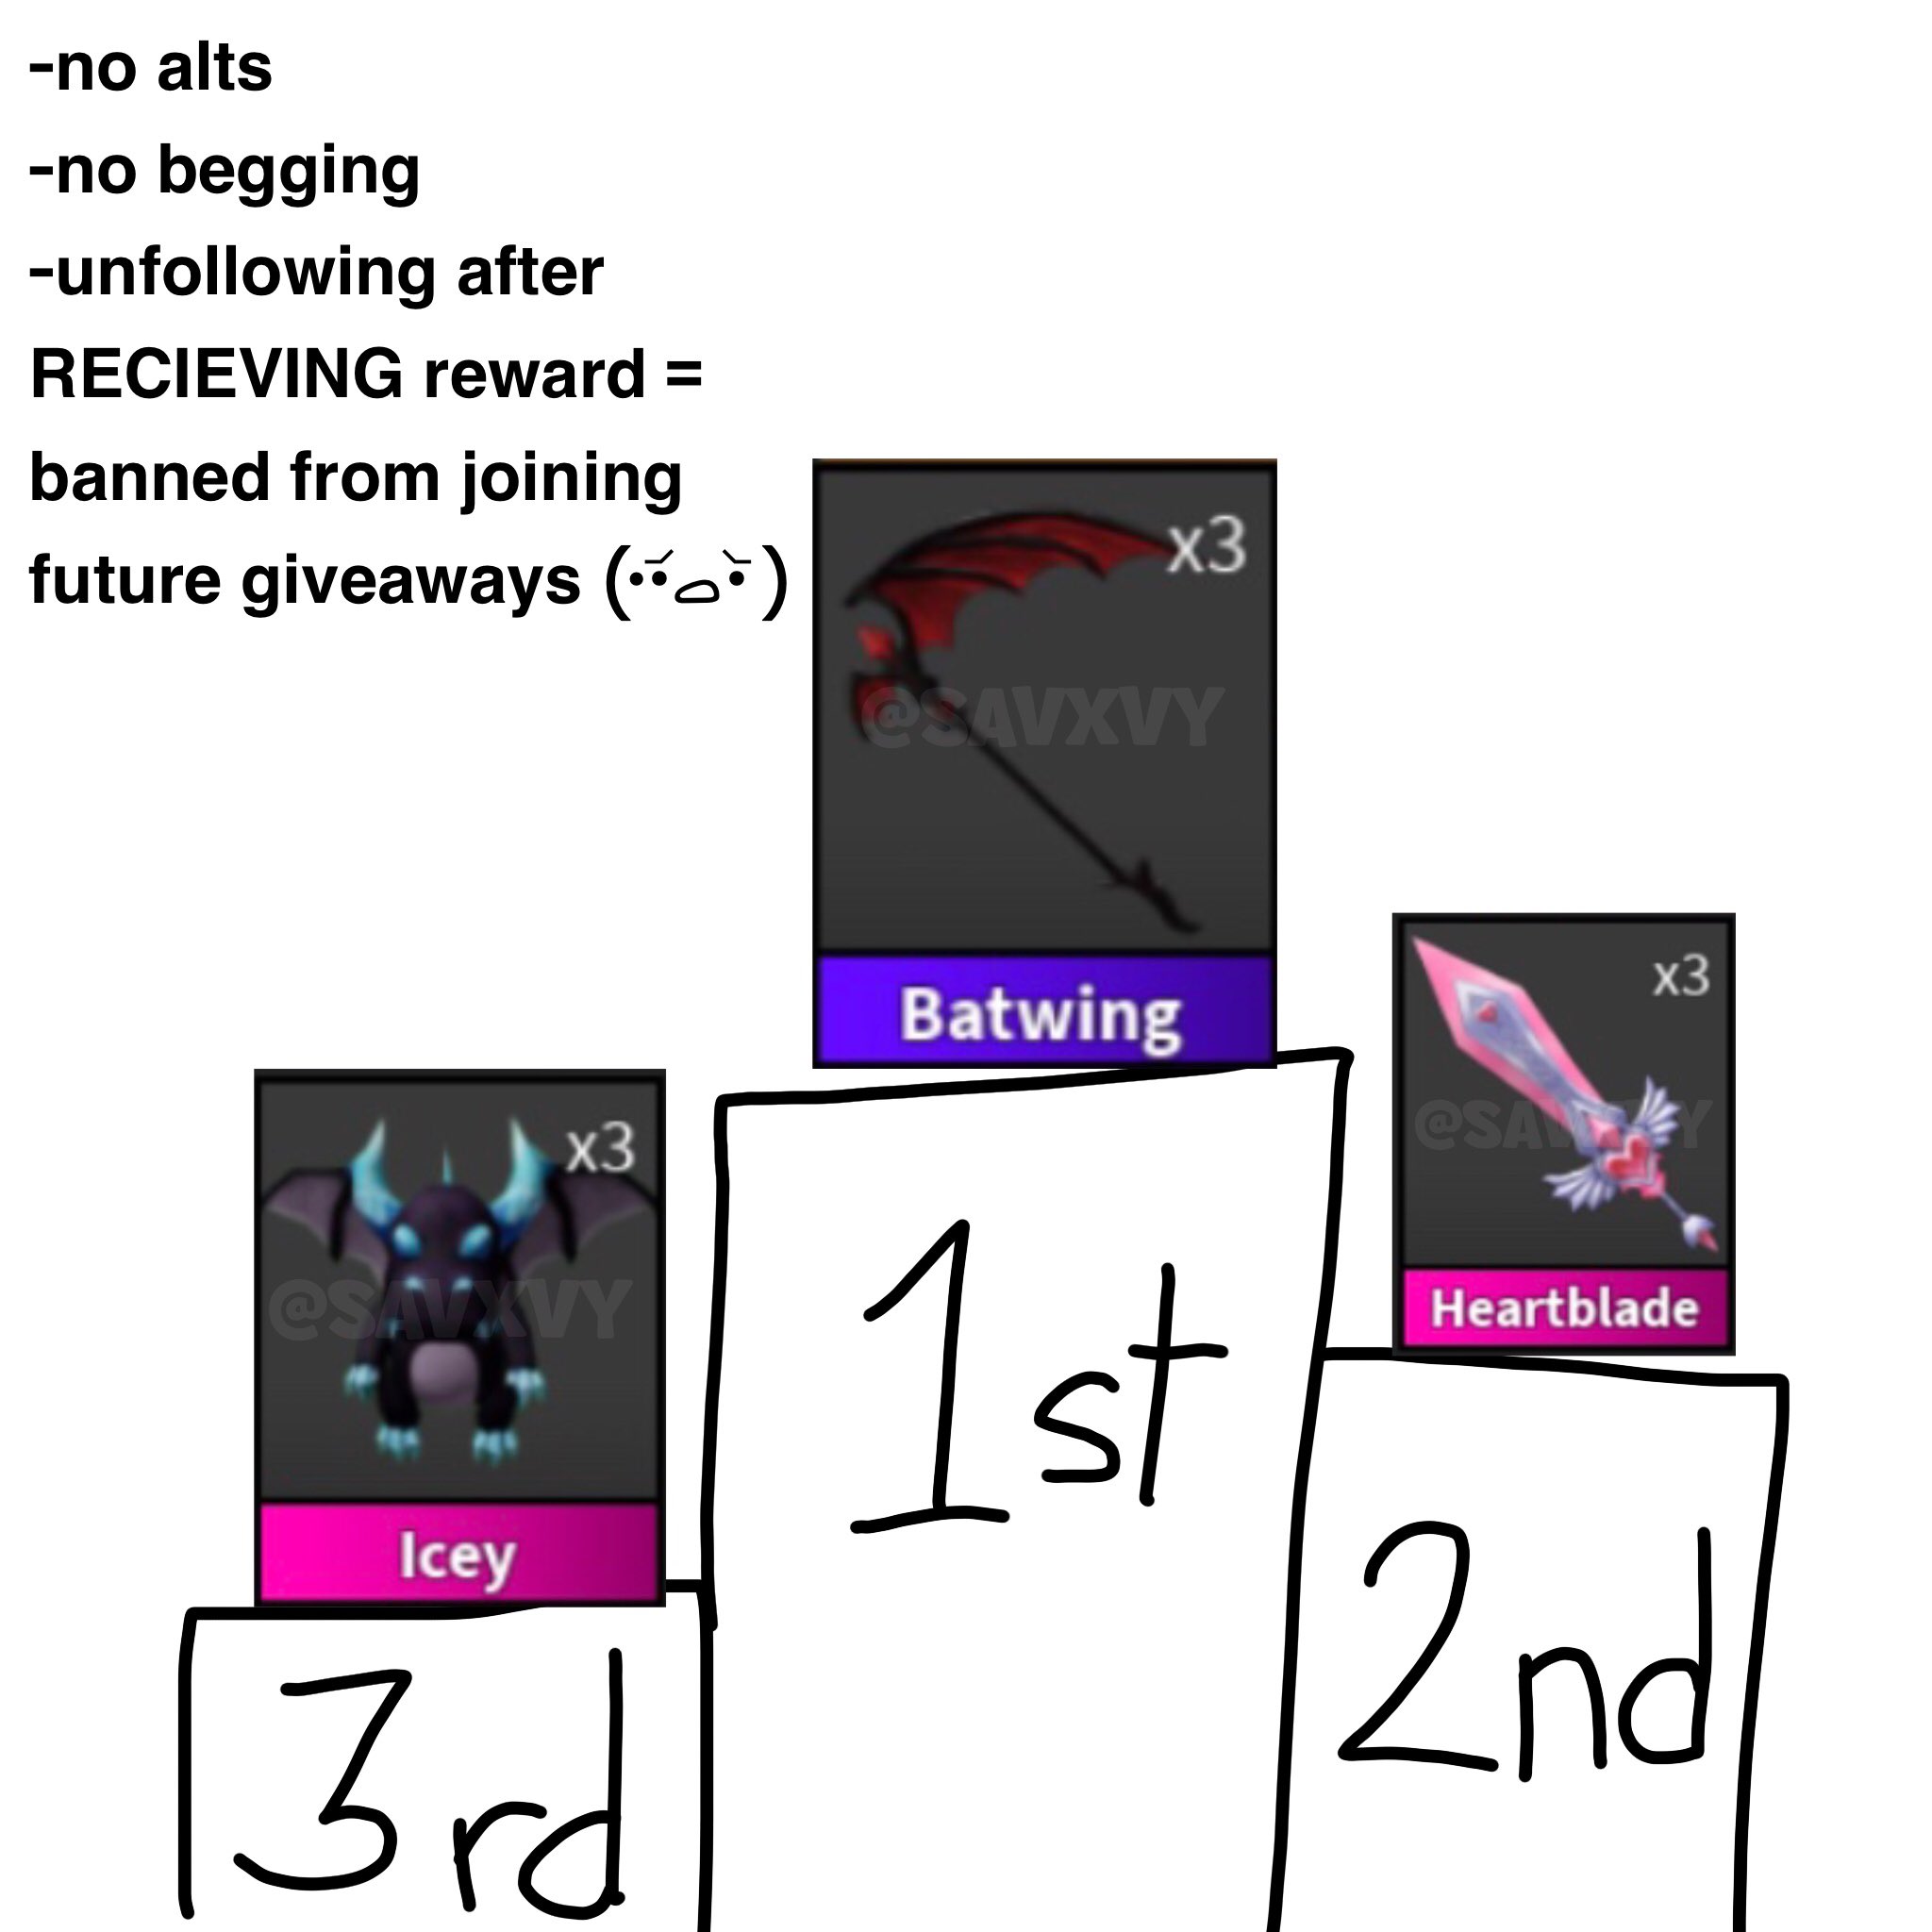 savxvy on X: ༻𝗠𝗠𝟮 𝗴𝗶𝘃𝗲𝗮𝘄𝗮𝘆༺ (3 winners) x1 Batwing x1 Heartblade  x1 Icey pet ୨⎯ 𝘁𝗼 𝗲𝗻𝘁𝗲𝗿:⎯୧ ➤follow ➤like ➤retweet ➤comment ୨⎯  𝗲𝗻𝗱𝘀: ⎯୧ ✄ when i reach 75 followers ୨⎯ 𝗲𝘅𝘁𝗿𝗮